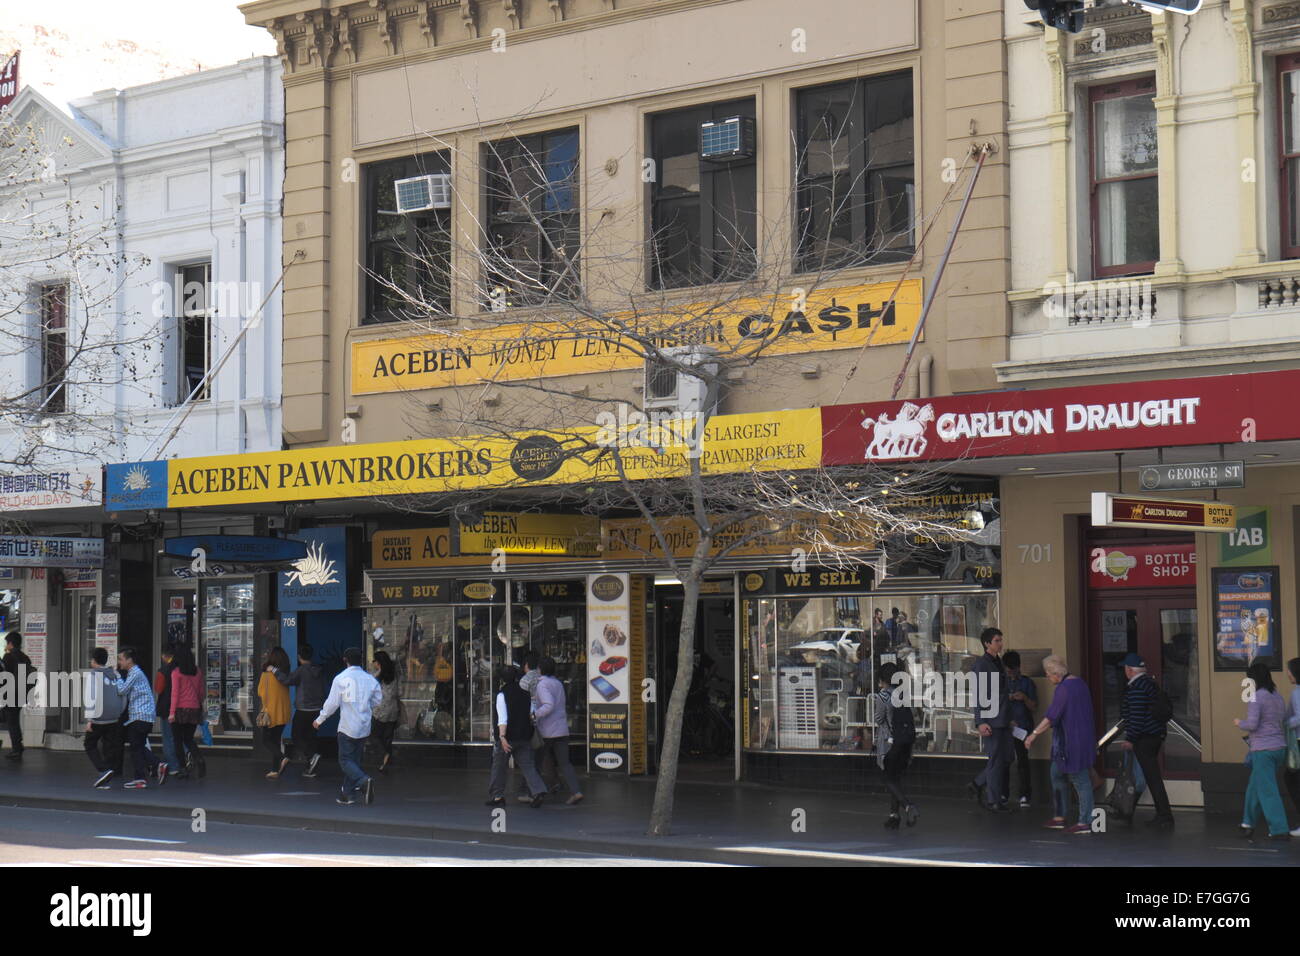 pawnbroker shop and pub selling carlton draught on sydney's george street  new south wales australia Stock Photo - Alamy